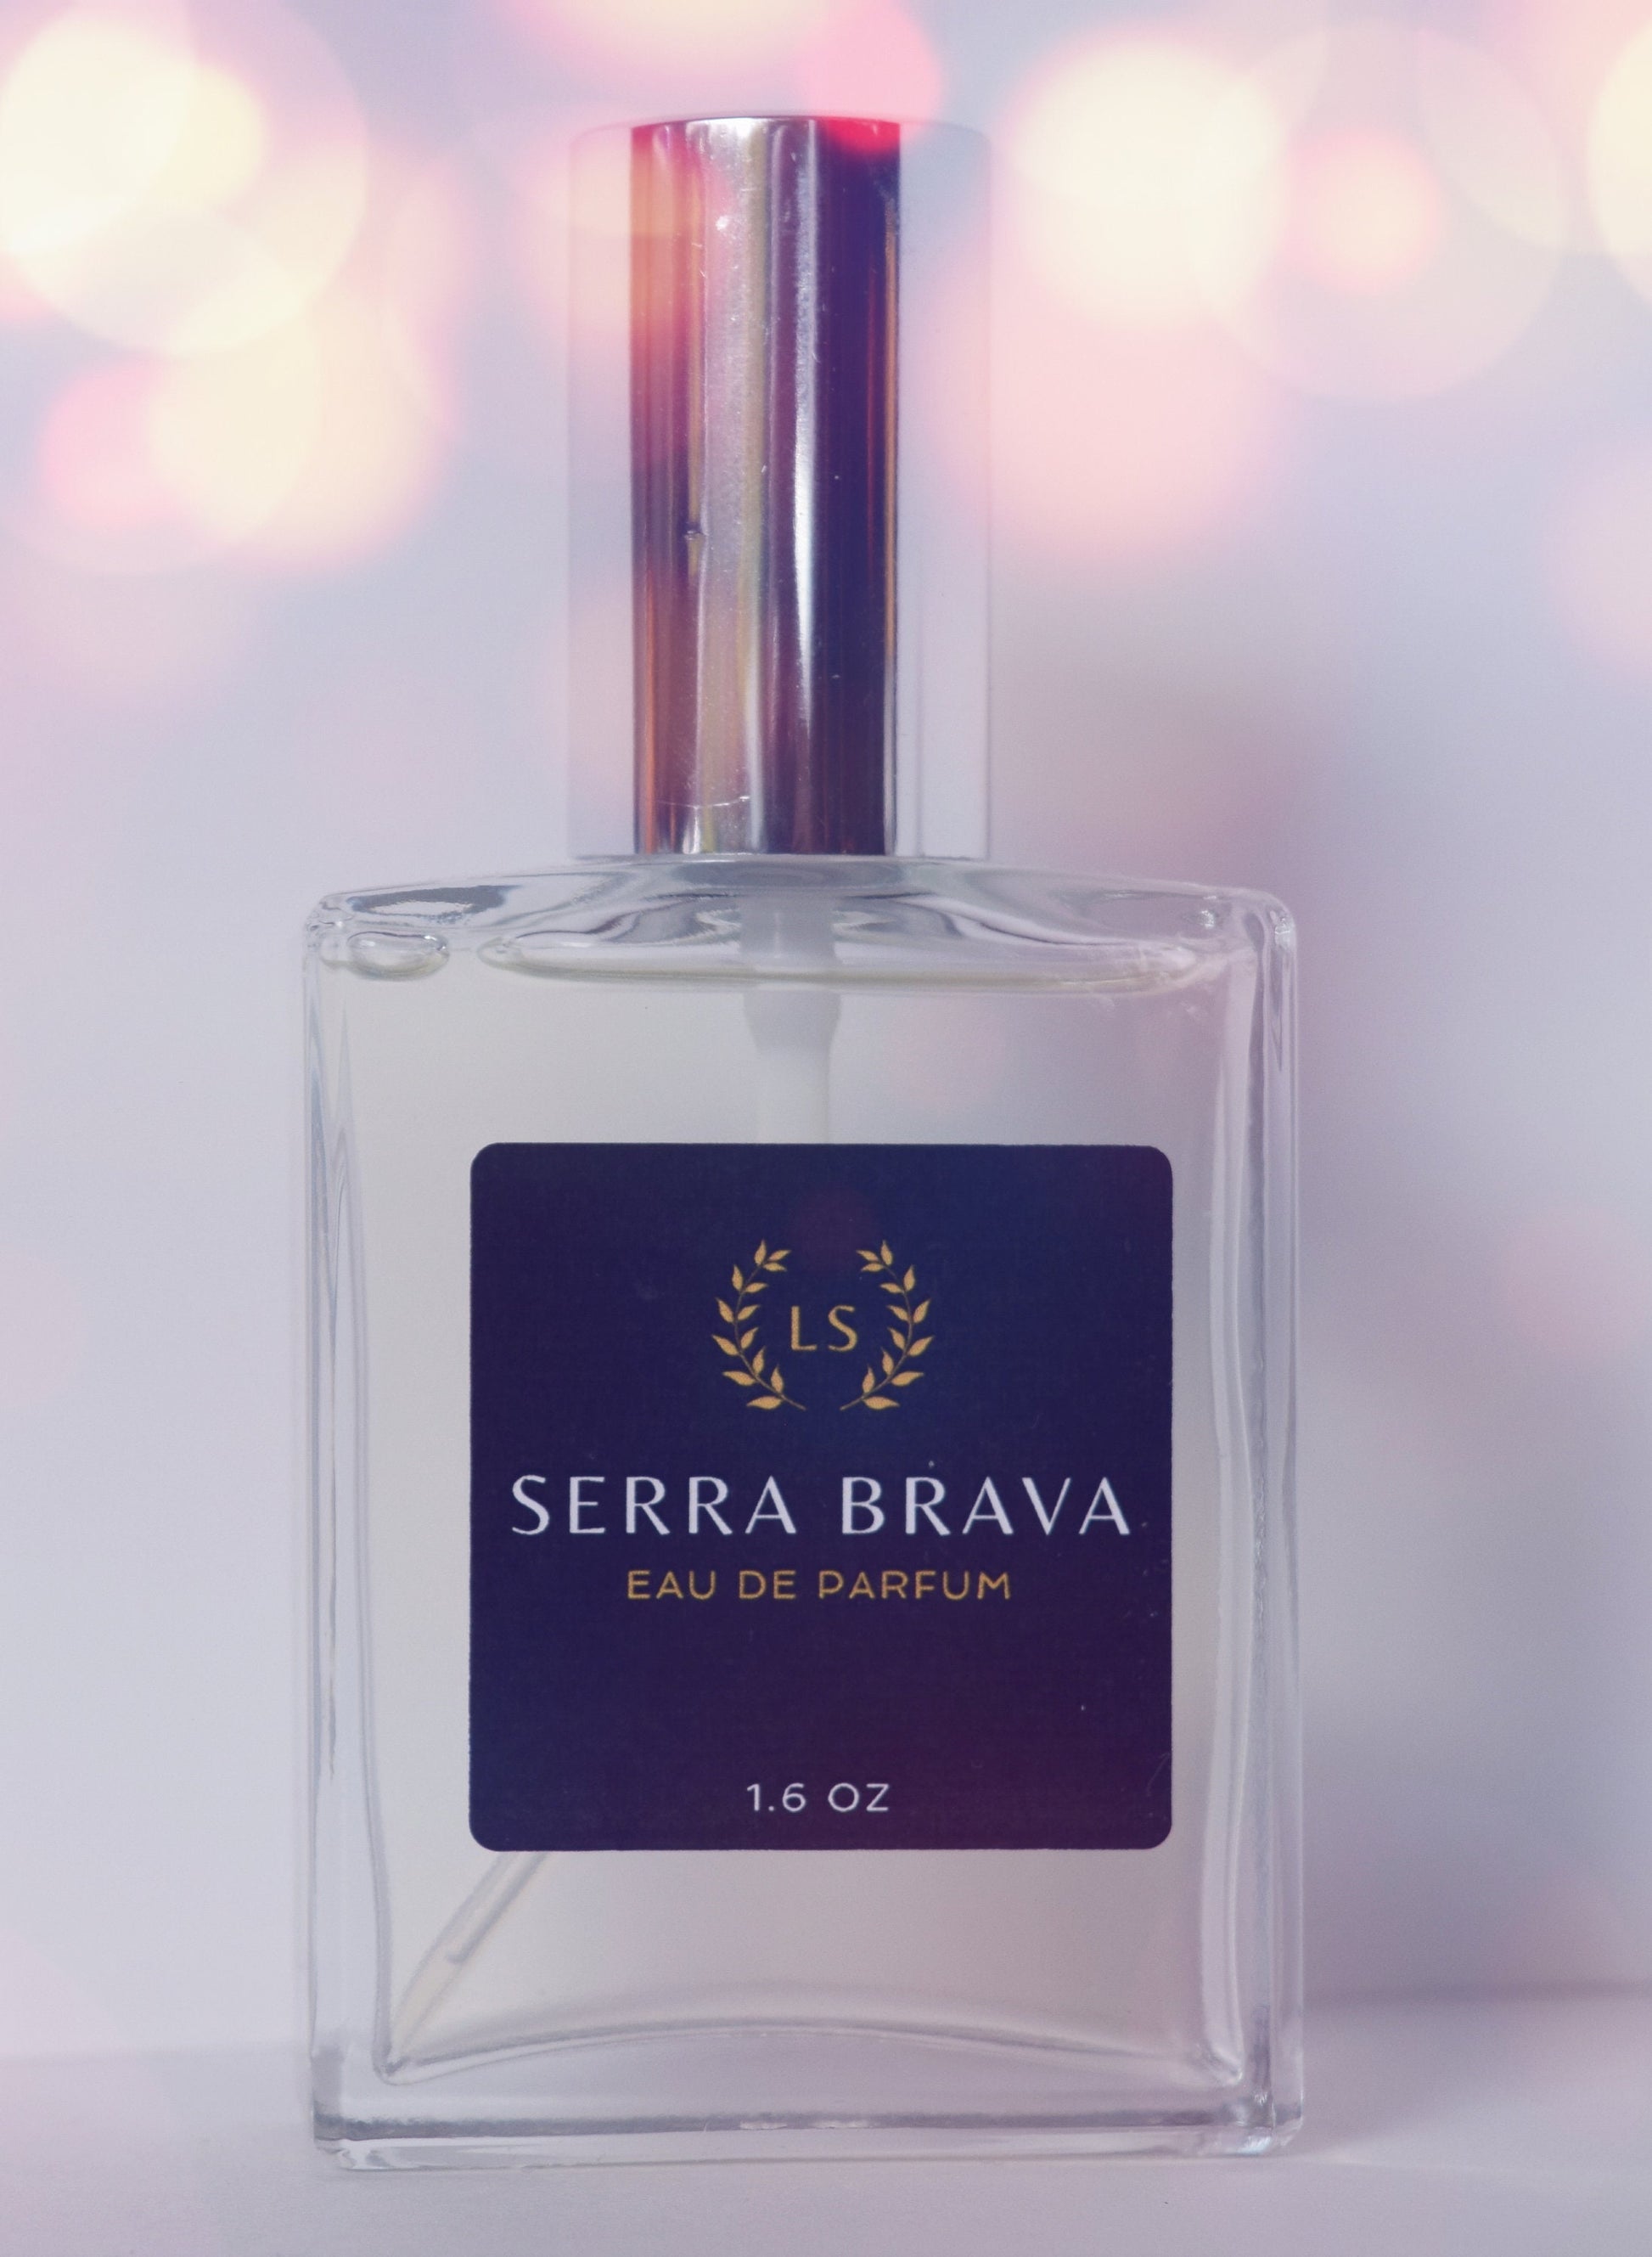 Bravo Sierra Eau de Cologne for Men, Citrus & Cedarwood Scent - 3.4 fl oz - Bold New Take on A Classic Musk - Made in The USA - Men's Perfume 